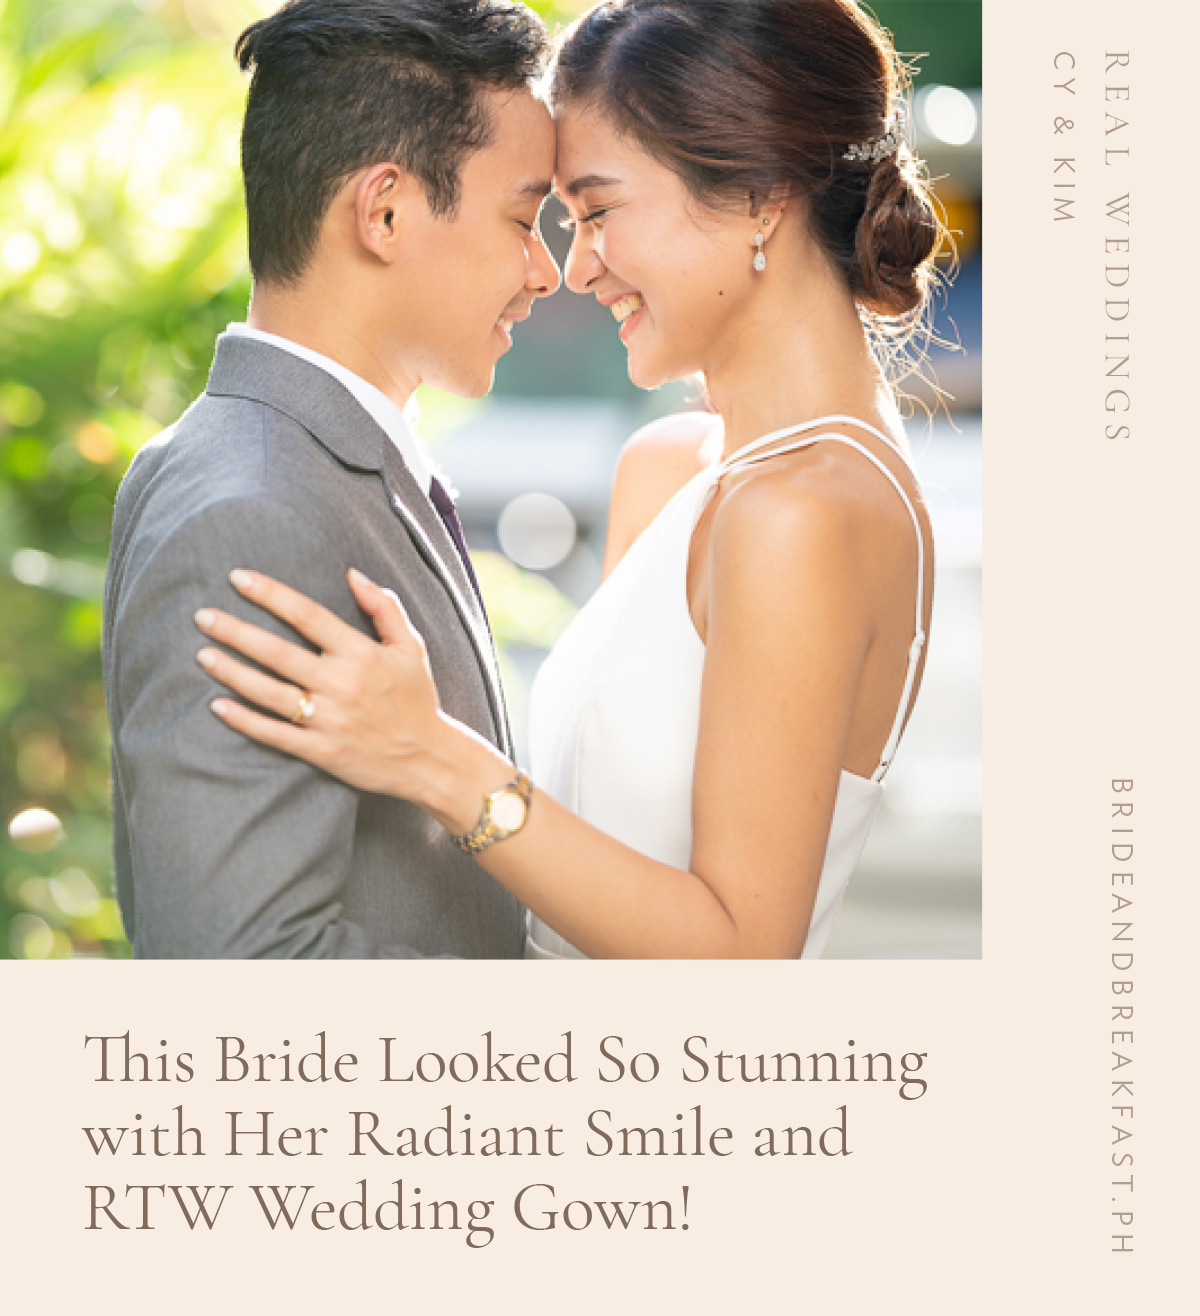 This Bride Looked So Stunning with Her Radiant Smile and RTW Wedding Gown!